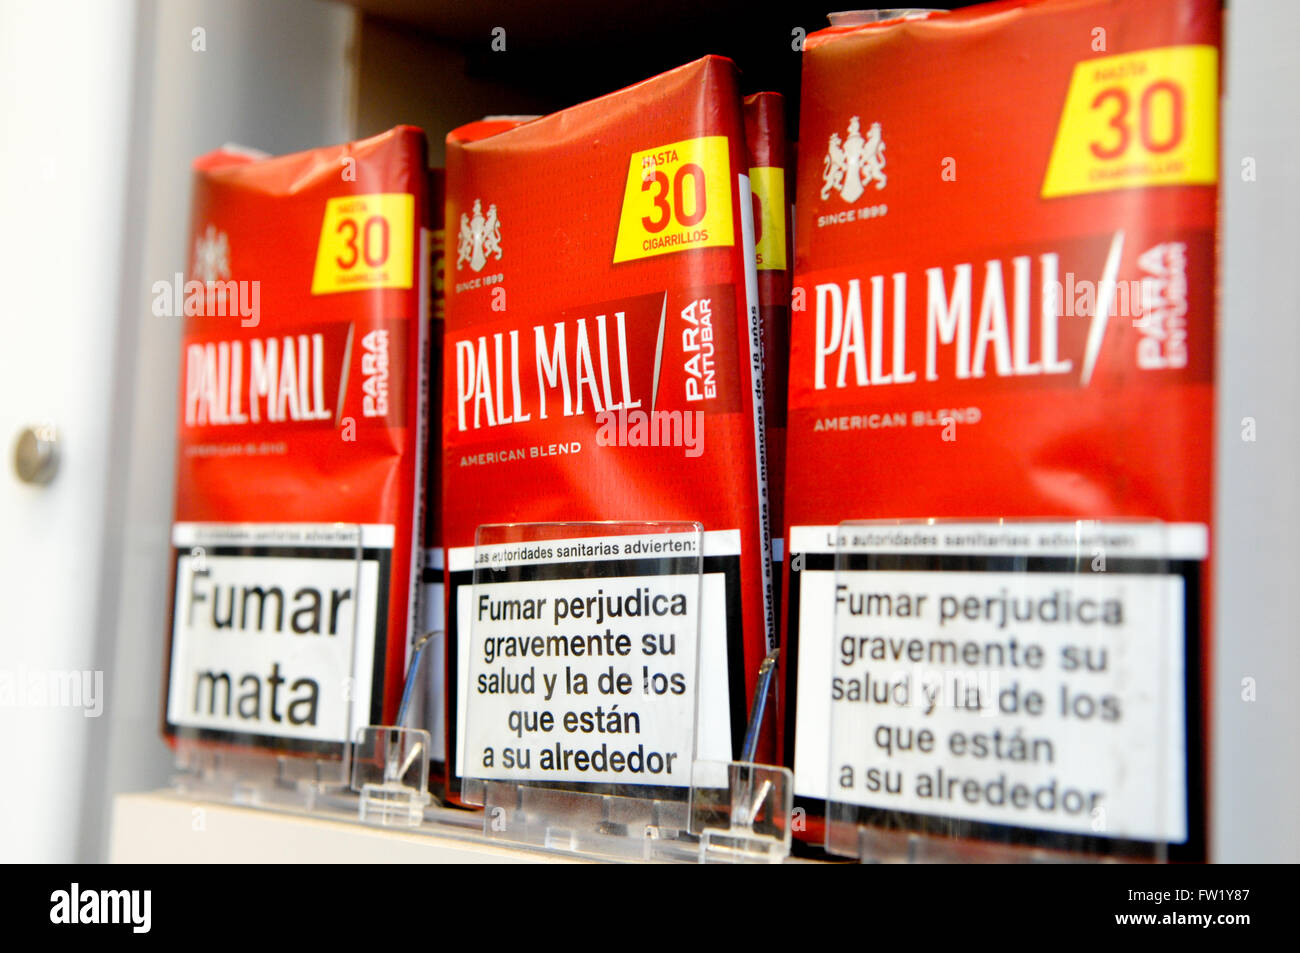 Pall Mall Cigarettes produced by British American Tobacco on sale in a tobacconist. Stock Photo